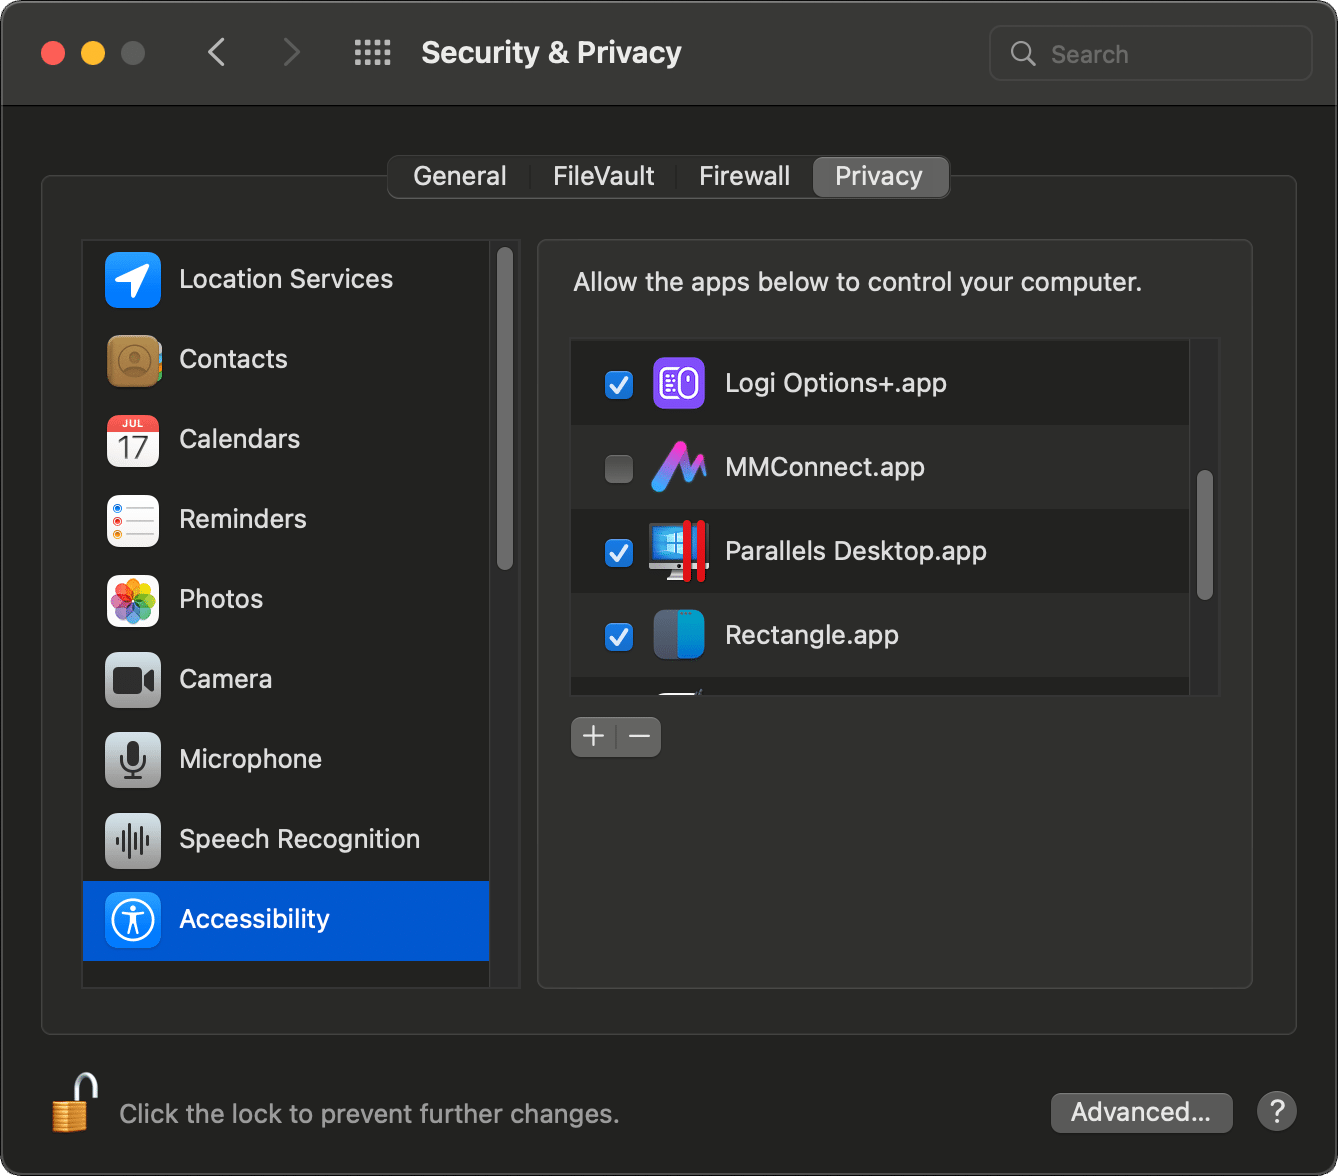 MacOS System Preferences with MMConnect disabled for Accessibility permissions.